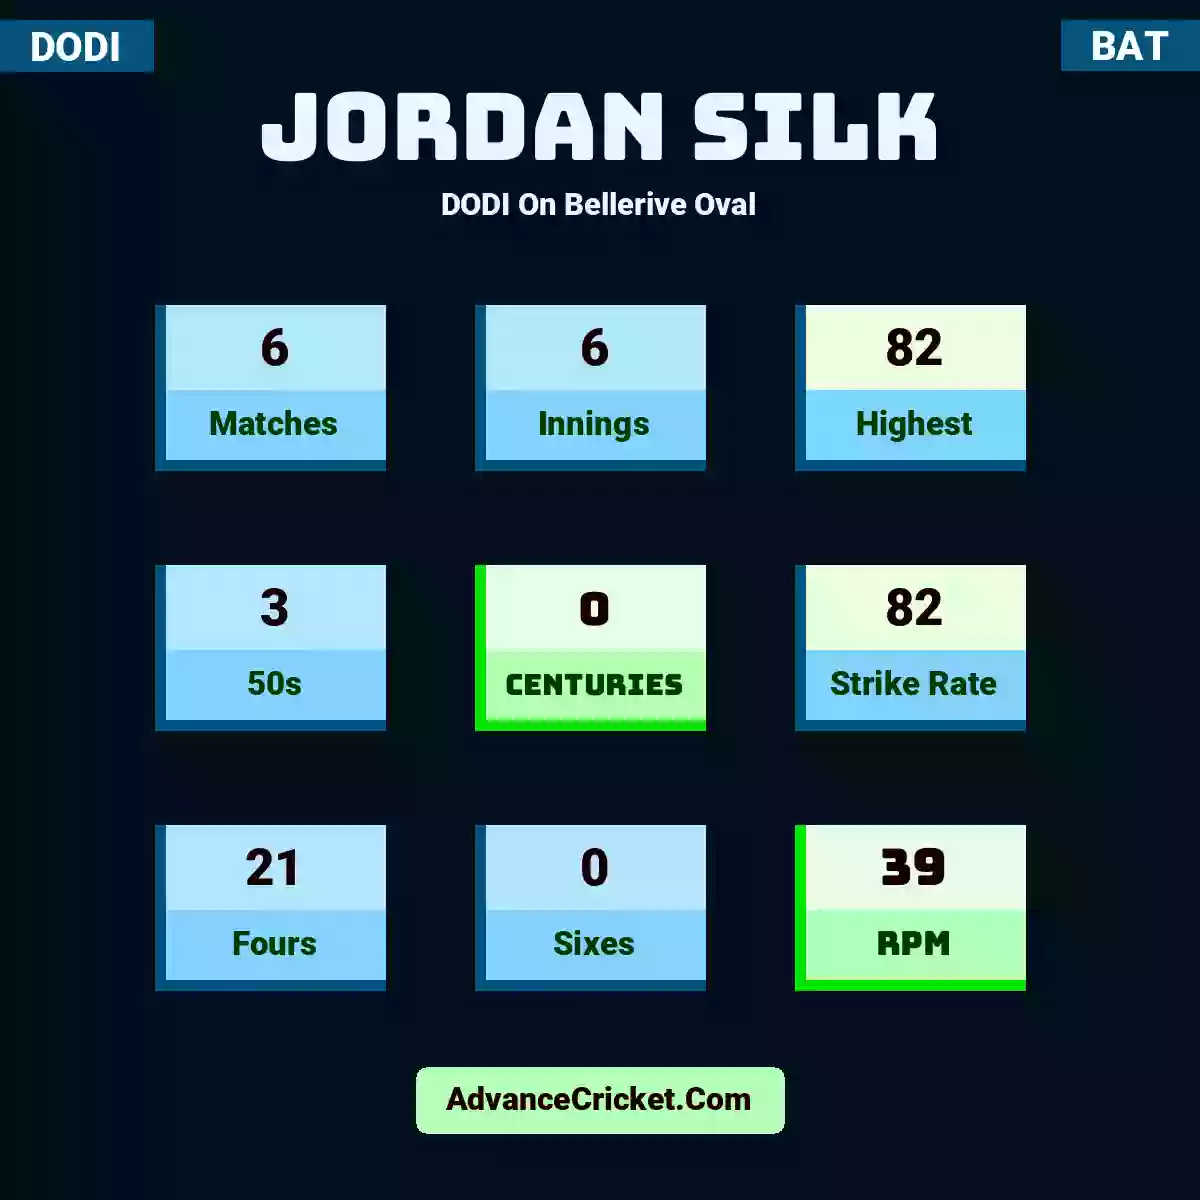 Jordan Silk DODI  On Bellerive Oval, Jordan Silk played 6 matches, scored 82 runs as highest, 3 half-centuries, and 0 centuries, with a strike rate of 82. J.Silk hit 21 fours and 0 sixes, with an RPM of 39.